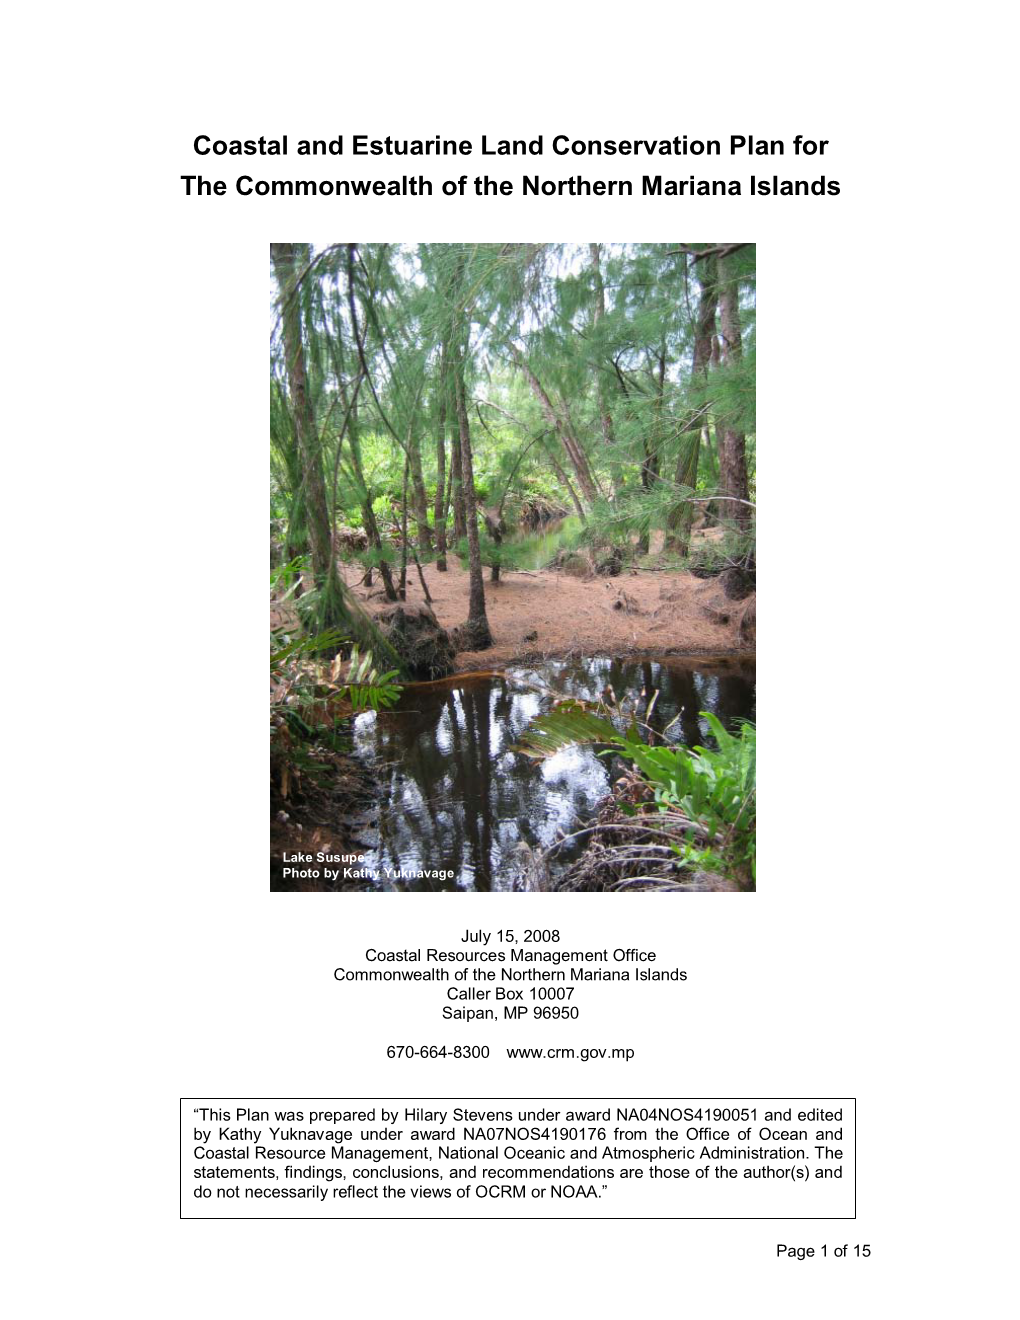 Coastal and Estuarine Land Conservation Plan for the Commonwealth of the Northern Mariana Islands